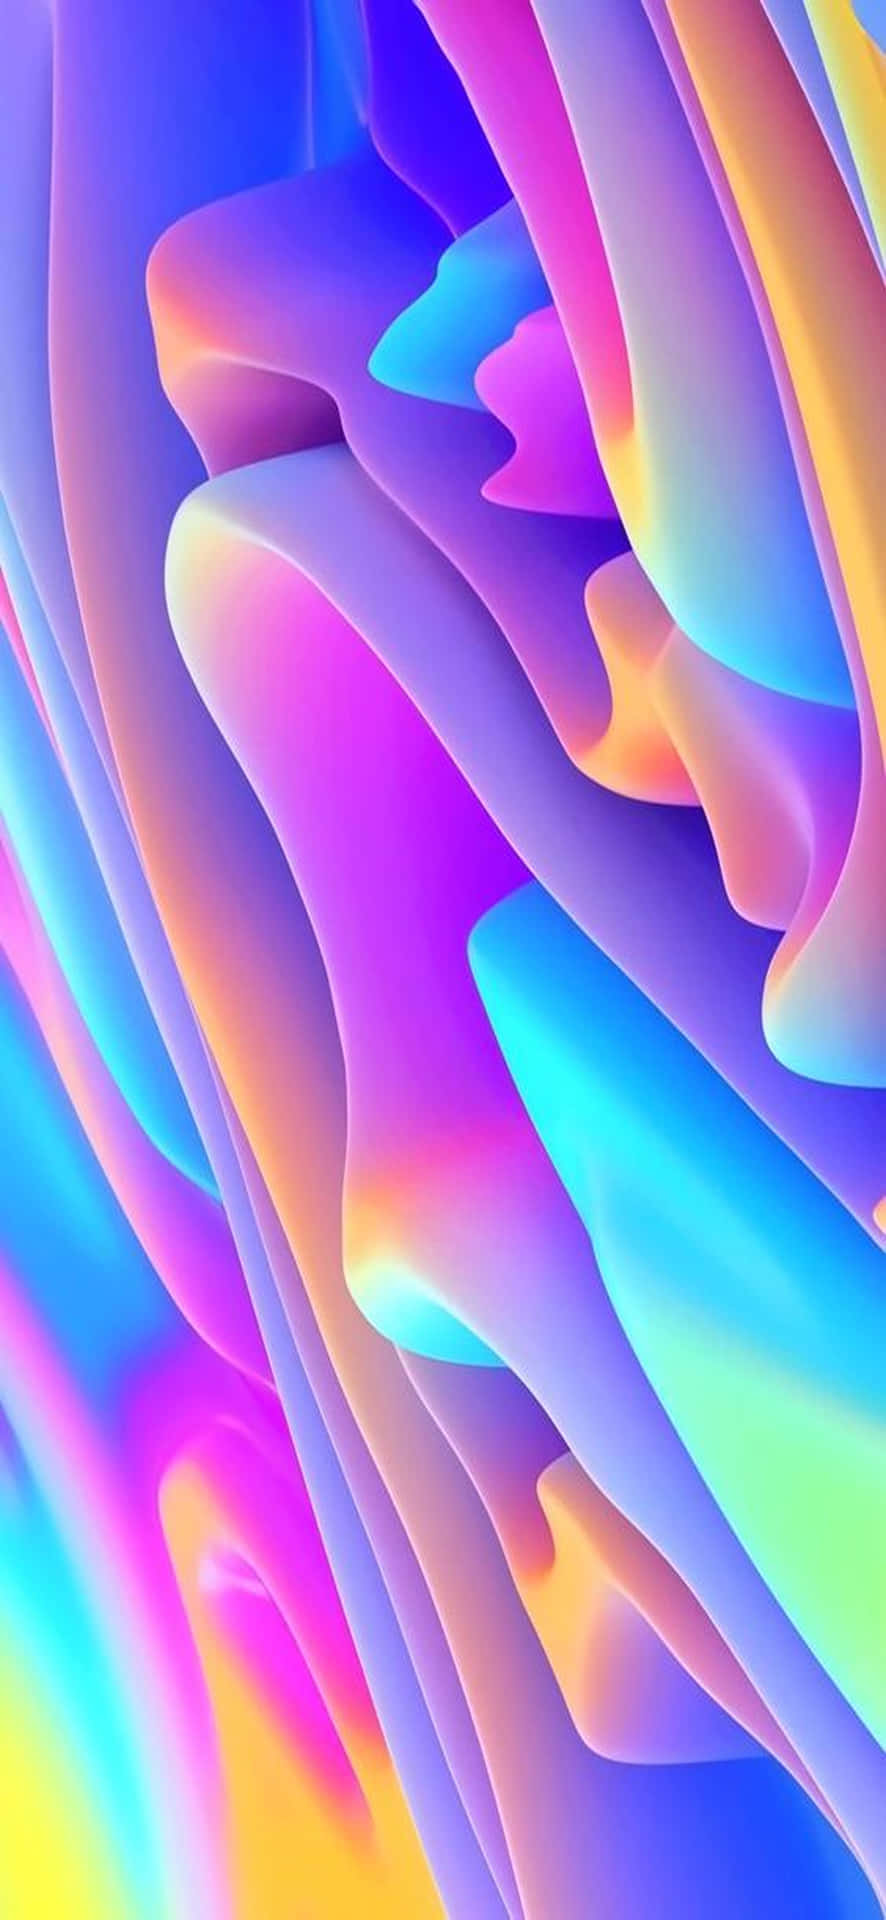 A Colorful Abstract Background With A Rainbow Colored Pattern